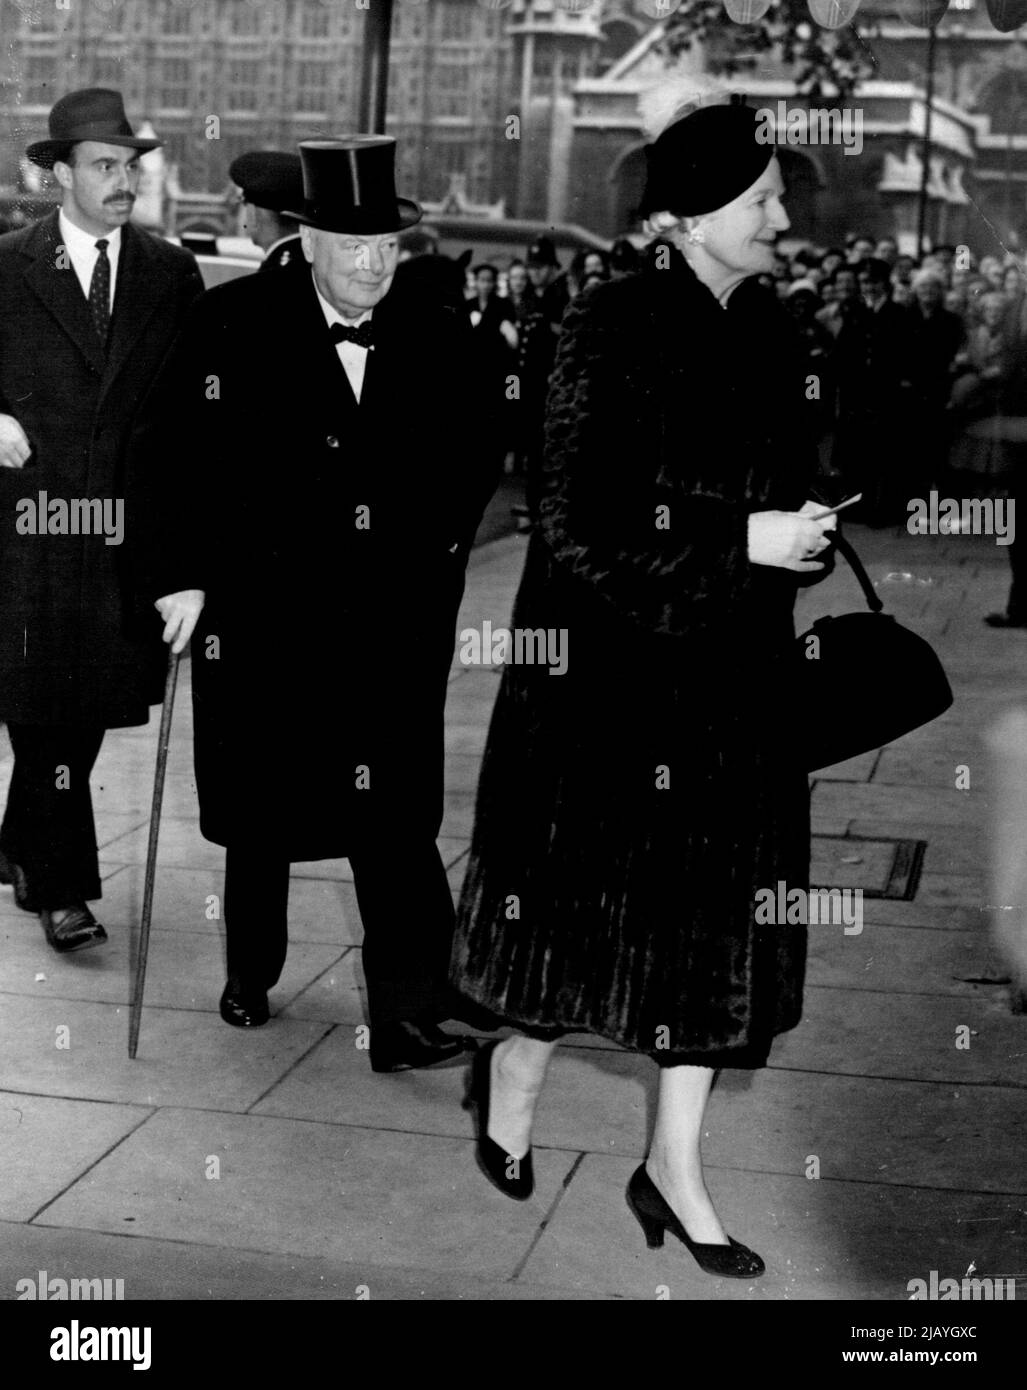 Churchill Arrive For 'Wedding of The Year': Mr. and Mrs. Winston Churchill, pictured here as they arrive at St. Margaret's, Westminster, London, for the wedding of the Marquis of Blandford and Miss Susan Hornby today (Friday). The 26-year-old ***** bridegroom, who is hair to the dukedom of Marlborough is a relative of Mr. Churchill. October 19, 1951. (Photo by Reuterphoto). Stock Photo